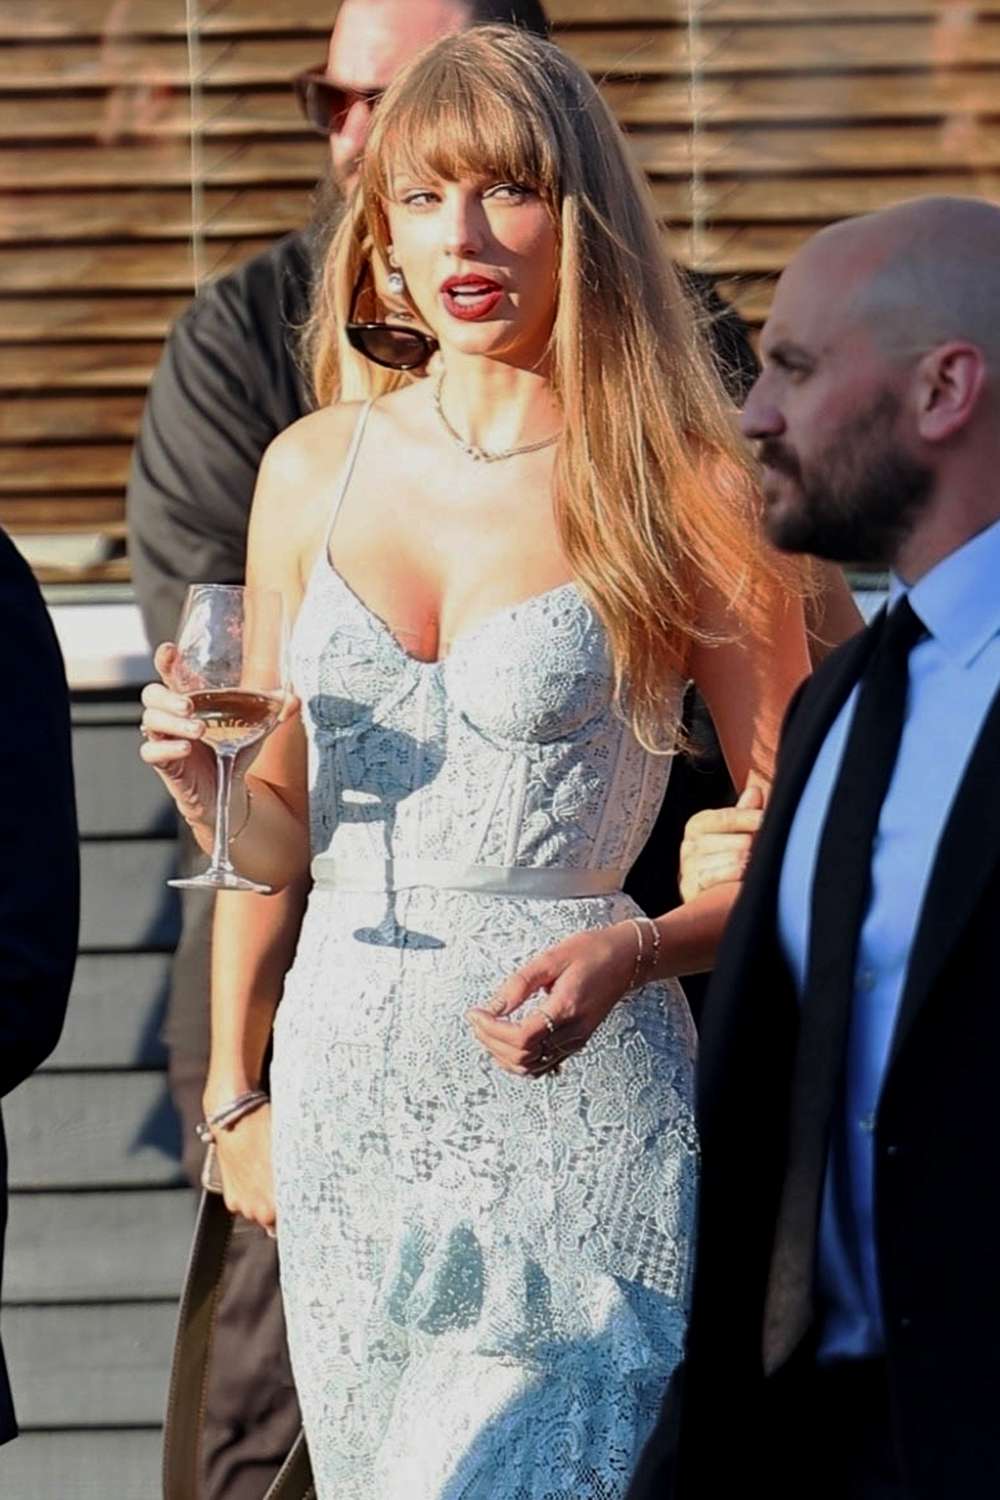 Taylor Swift stuns as she arrives at the wedding reception of friends Margaret Qualley and Jack Antanoff!